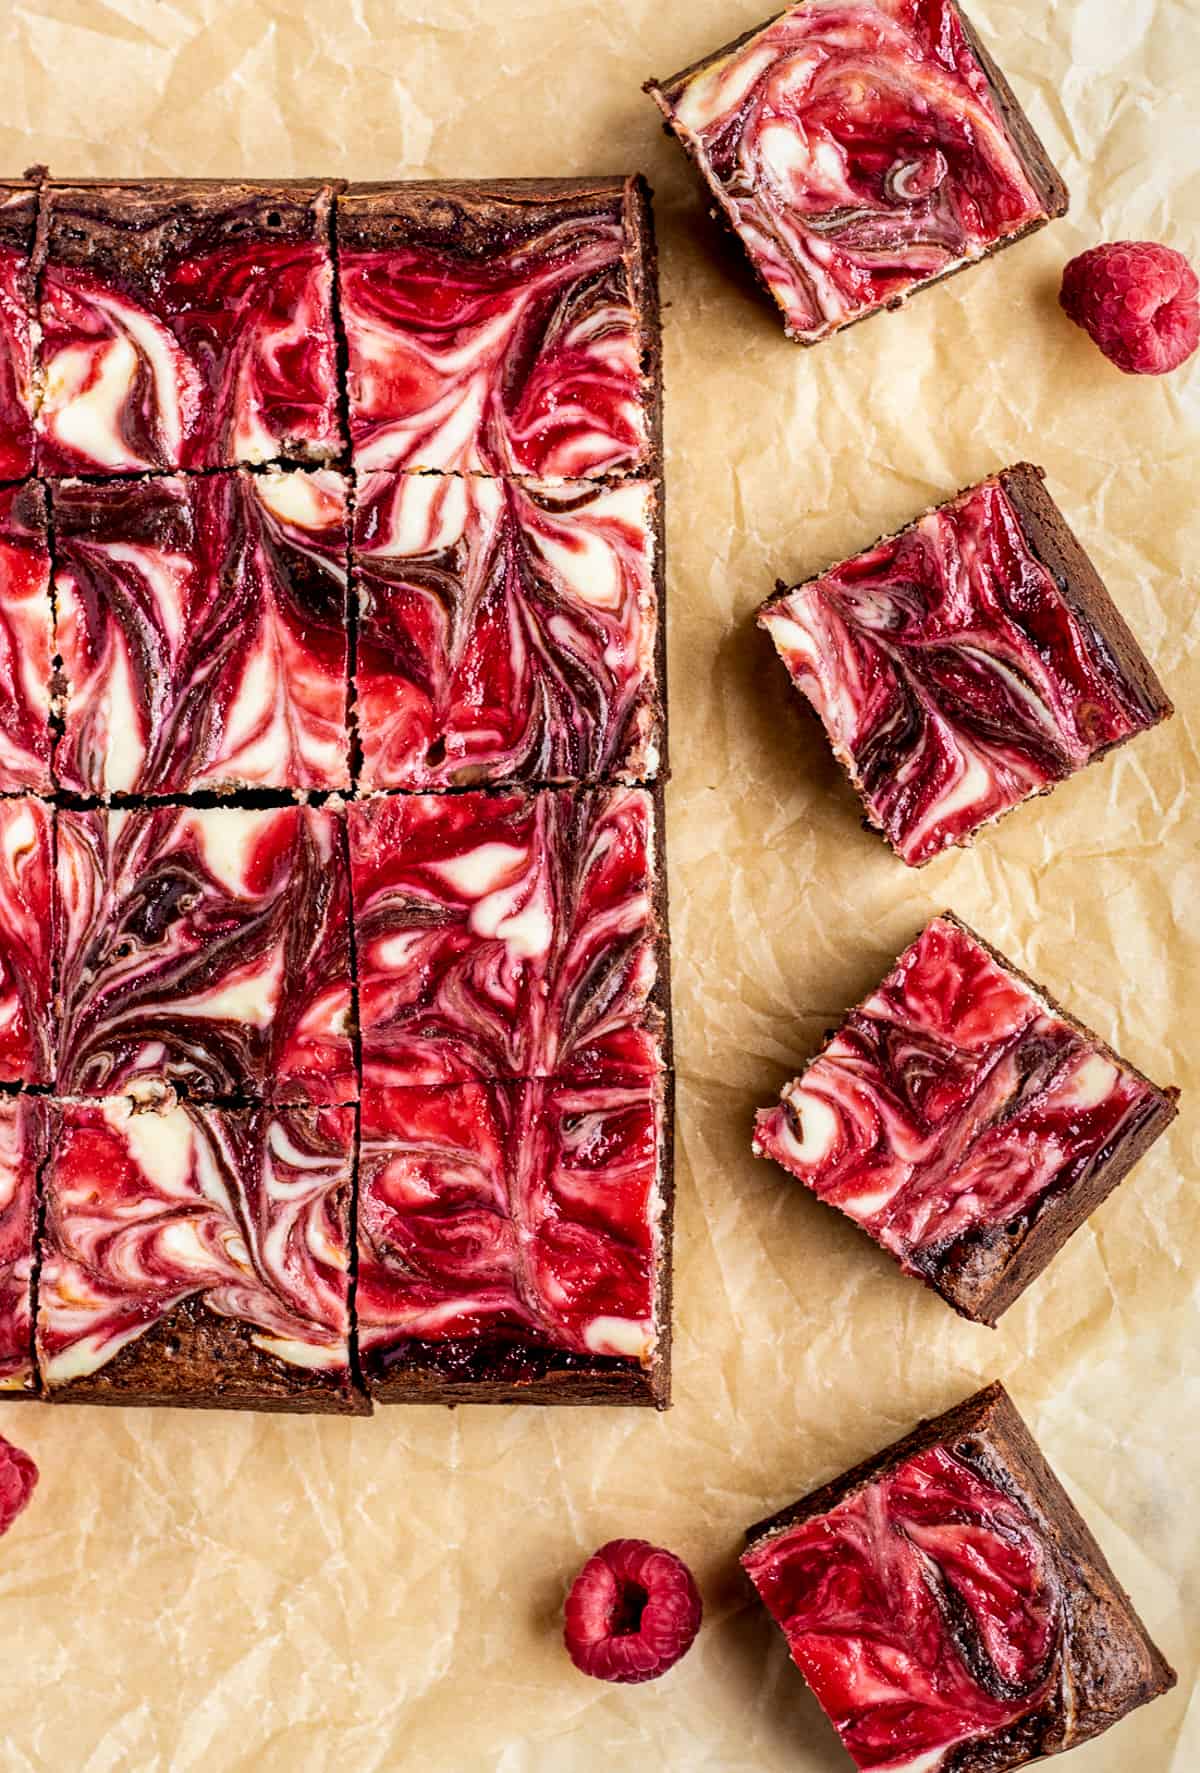 Brownies cut into squares